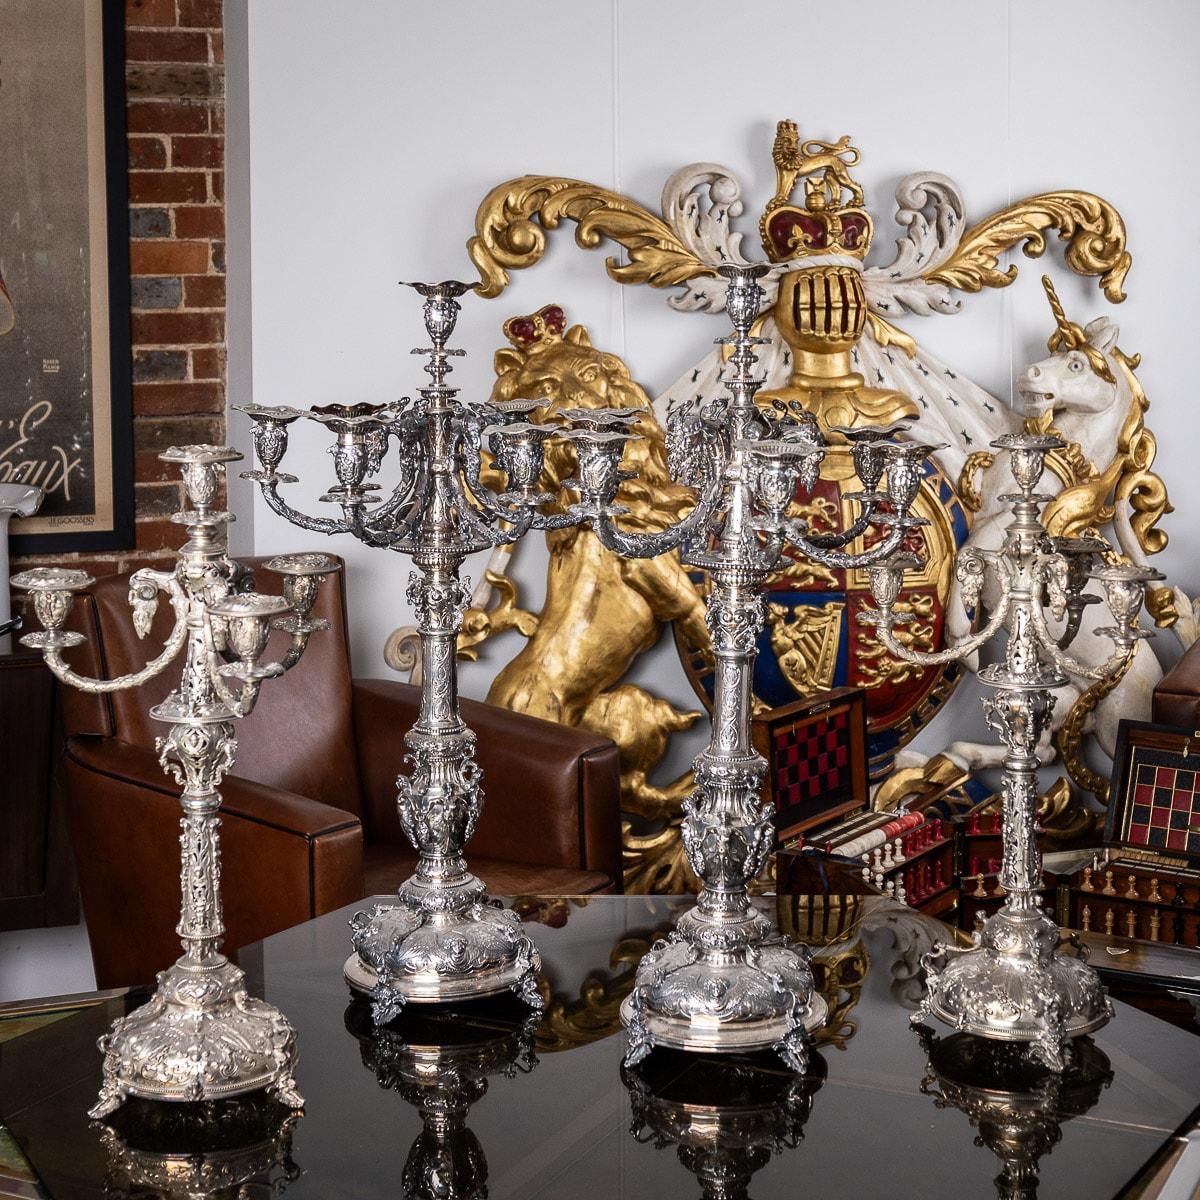 Antique 19th century Victorian exceptional & very unusual set of four solid silver candelabras. Each large seven-light and smaller four-light candelabra set with repousse neoclassical bobéches issuing from ram's head supports, decorated throughout